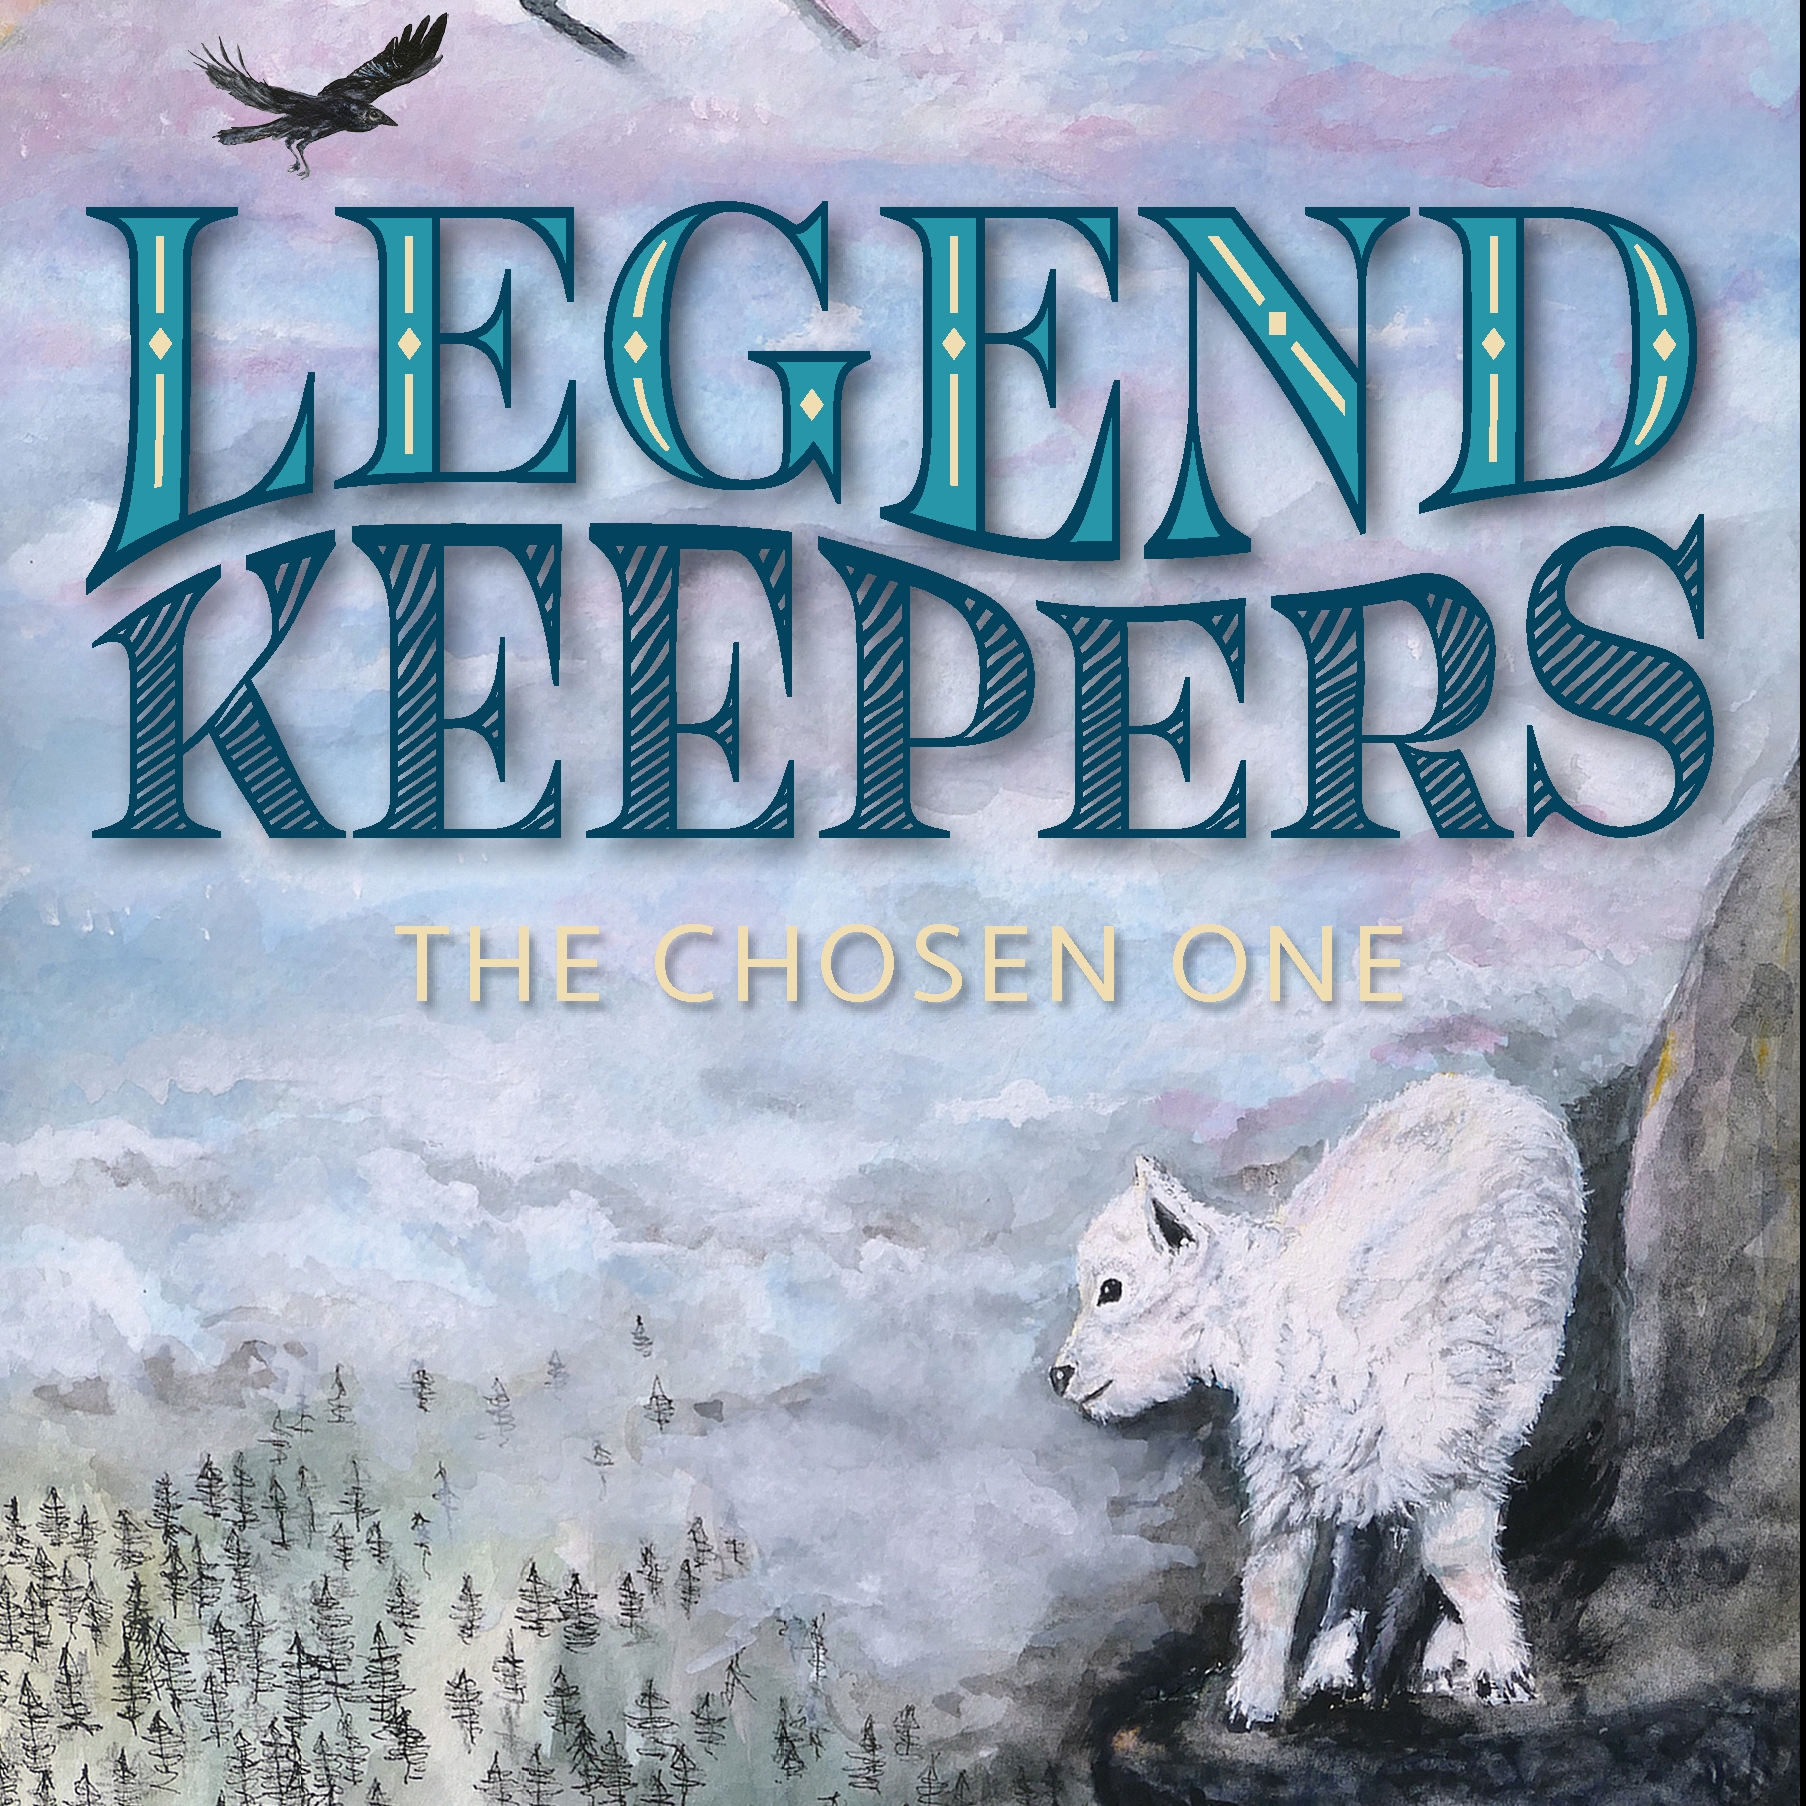 Legend Keepers: The Chosen One (Paperback)